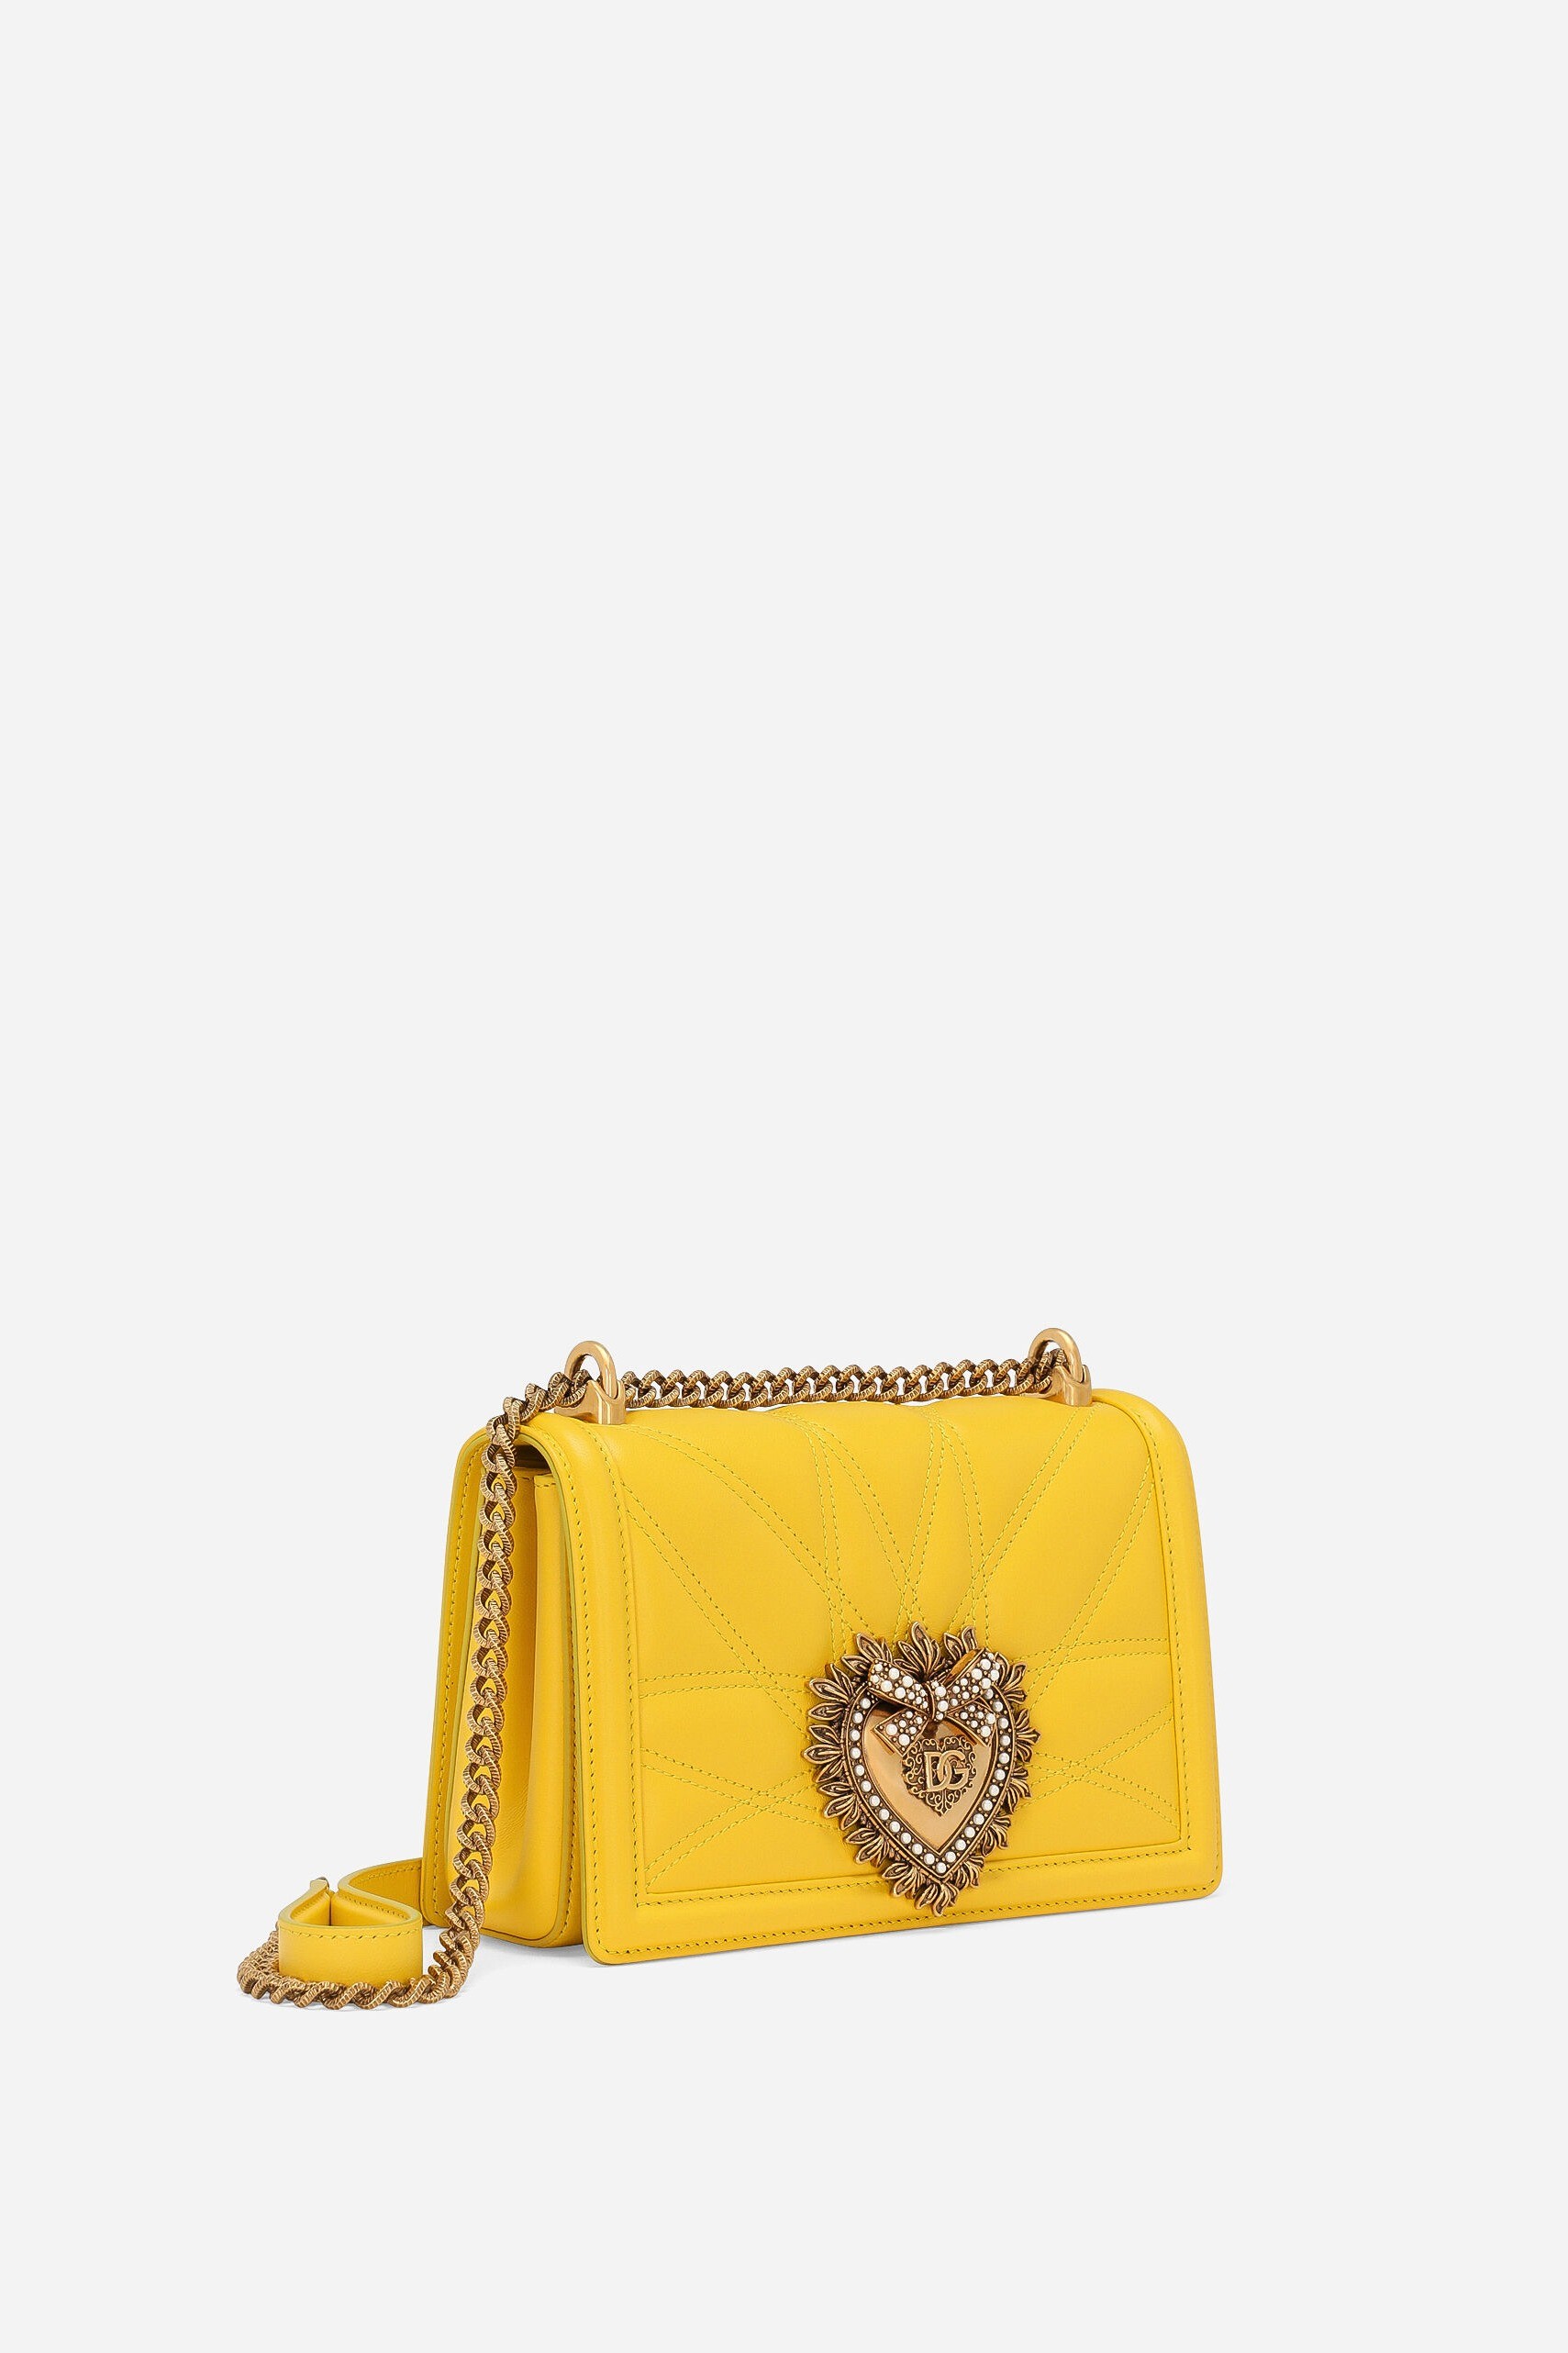 MEDIUM DEVOTION BAG IN QUILTED NAPPA LEATHER - Yellow